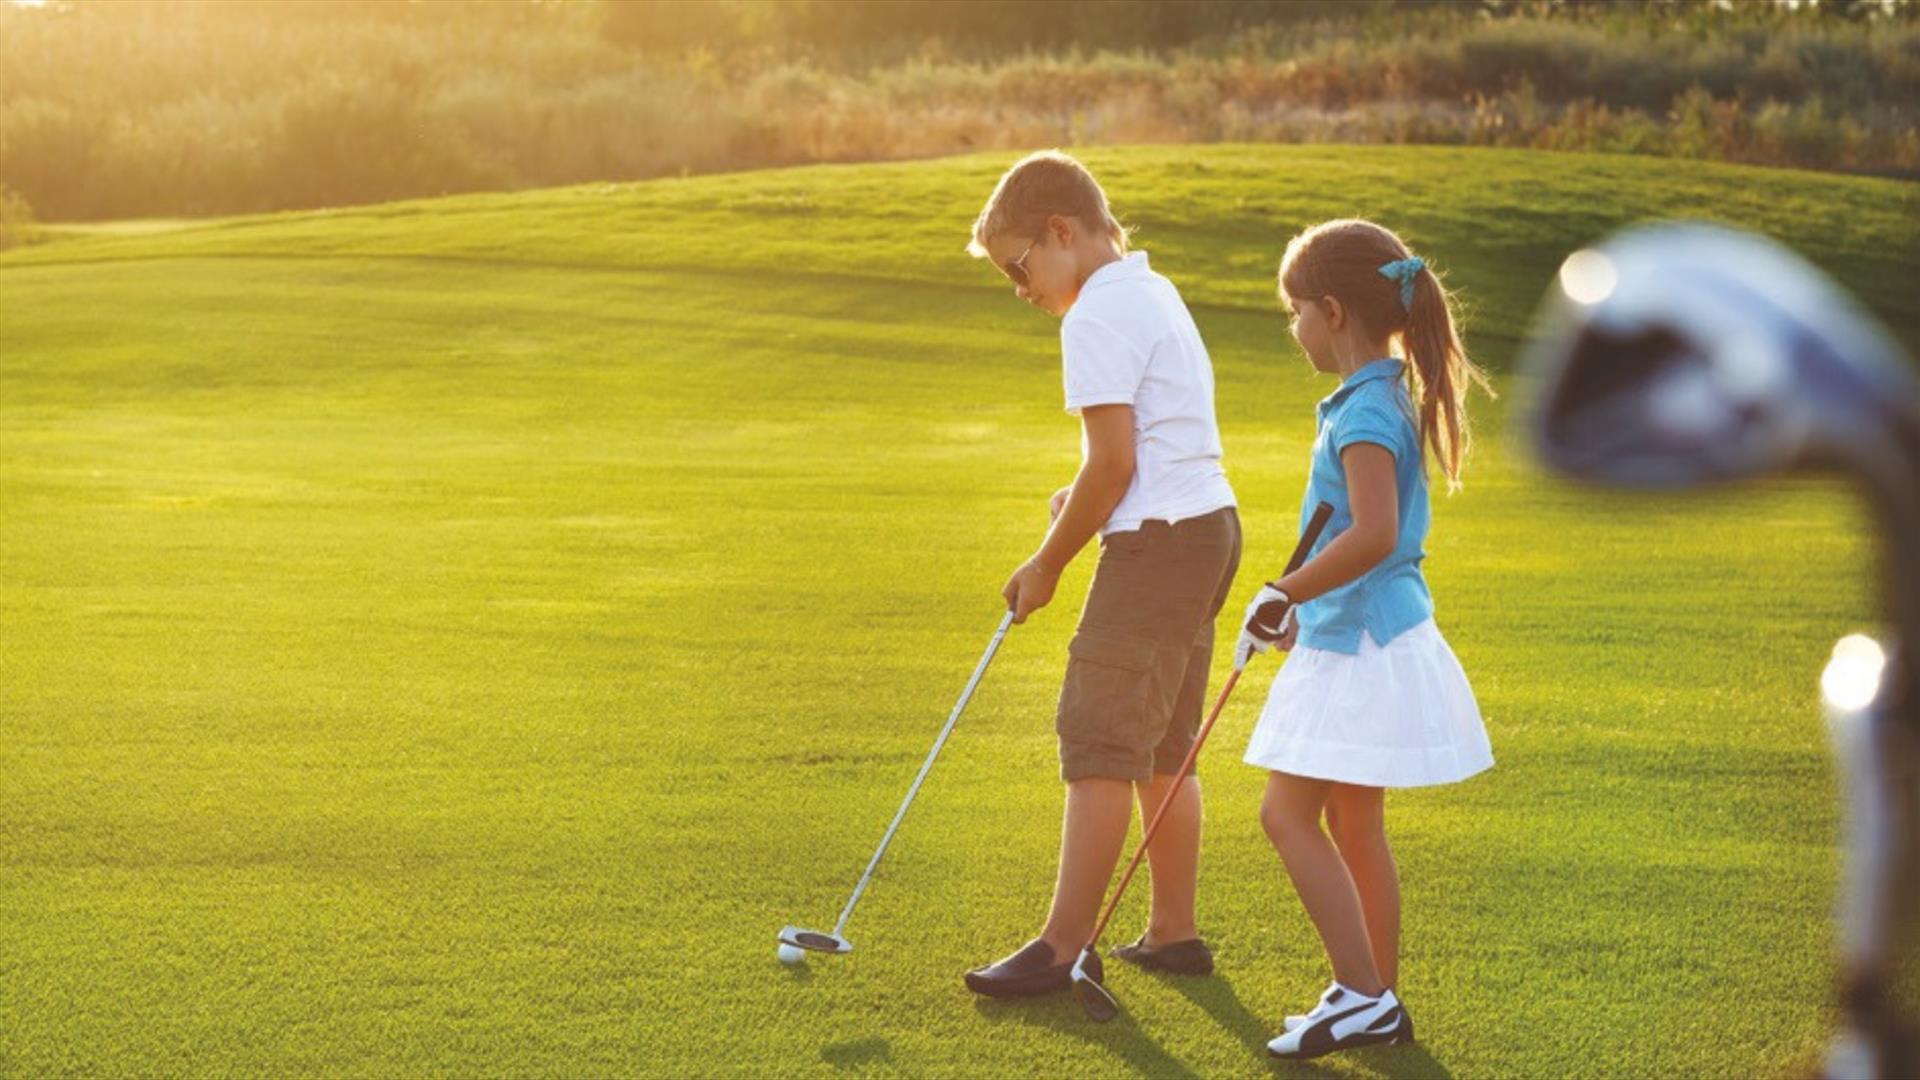 A young boy and a girl playing golf.